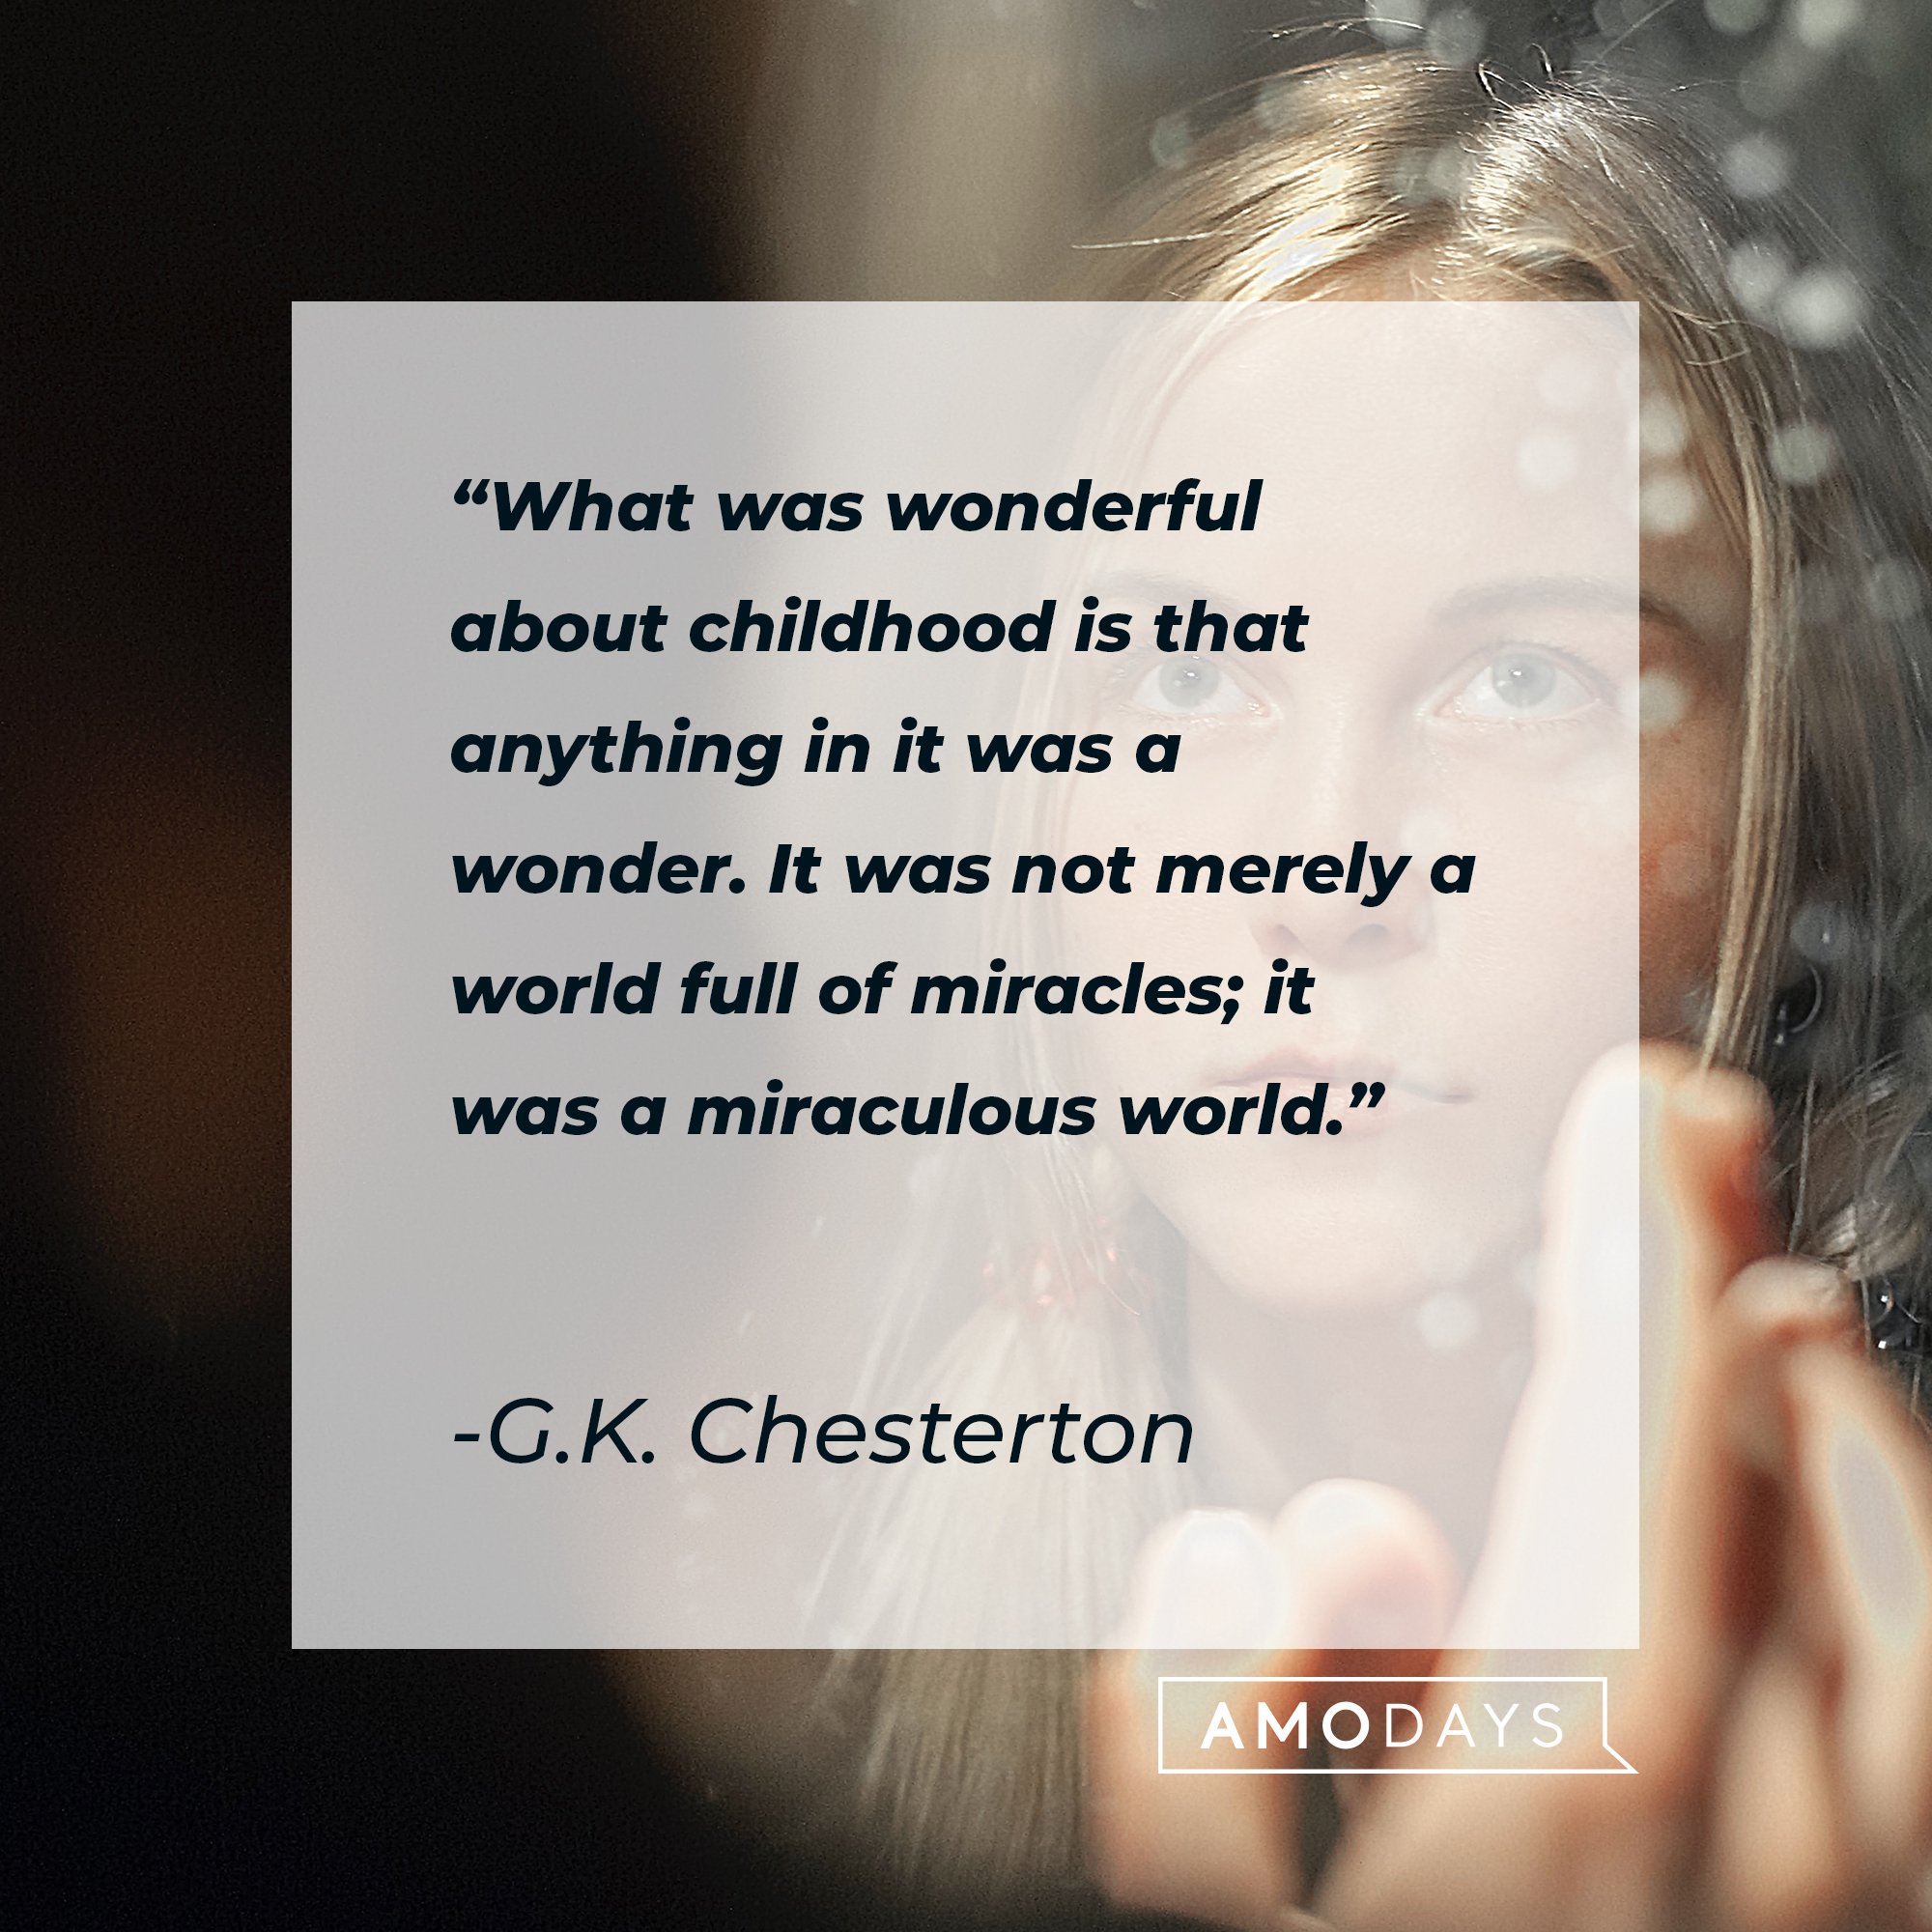 G.K. Chesterton’s quote: "What was wonderful about childhood is that anything in it was a wonder. It was not merely a world full of miracles; it was a miraculous world." | Image: AmoDays